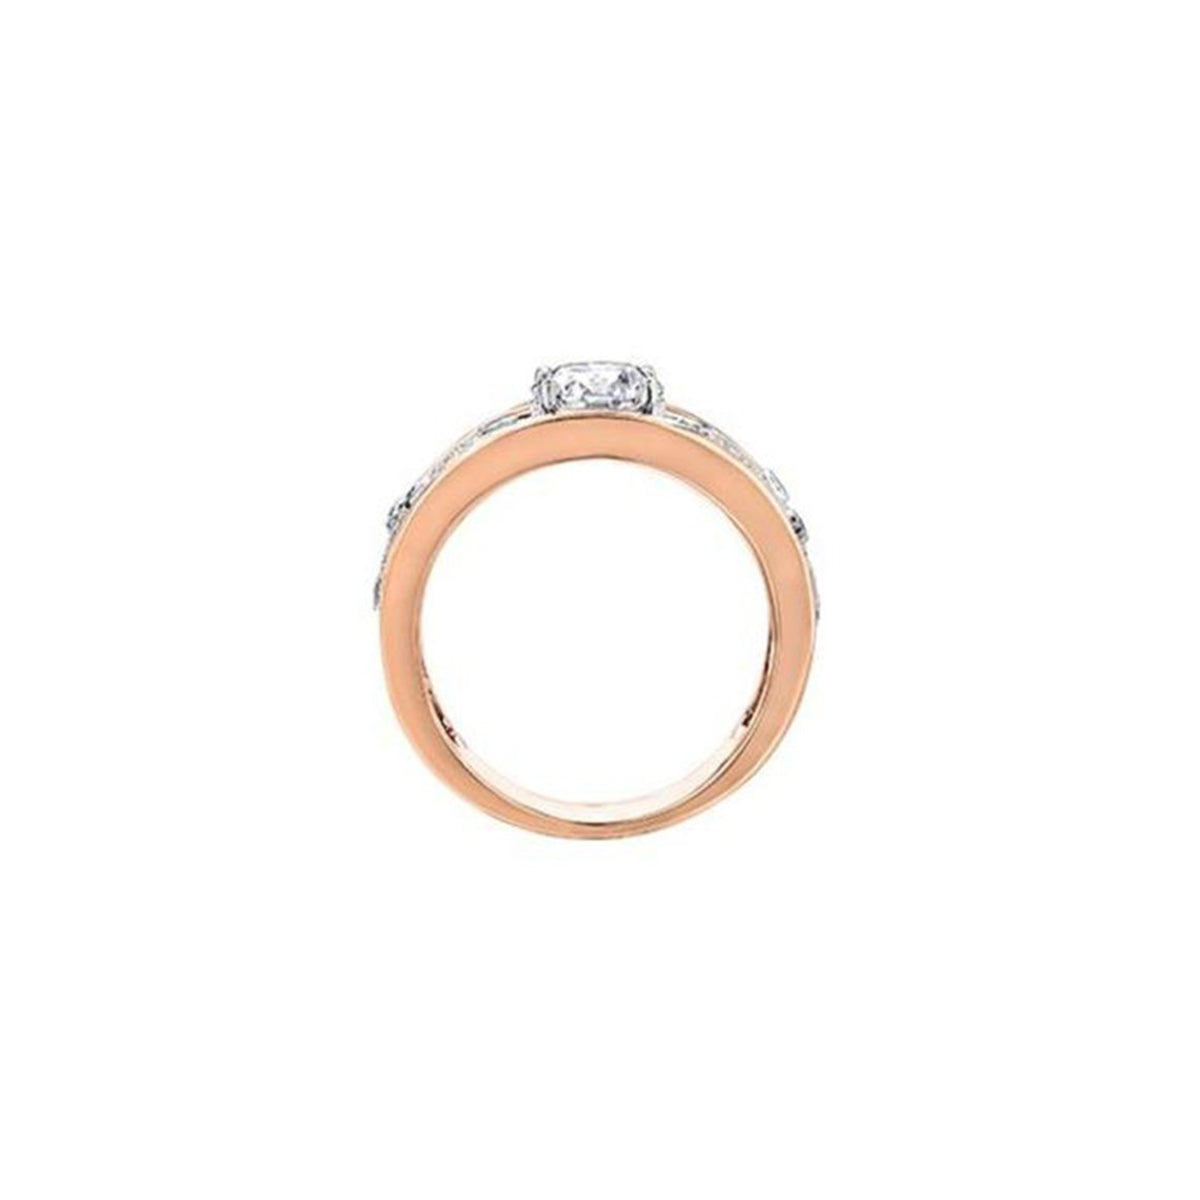 Crafted in rose and white 18KT Certified Canadian Gold, this engagement ring features a diamond set rose vine design with a round brilliant-cut Canadian centre diamond.